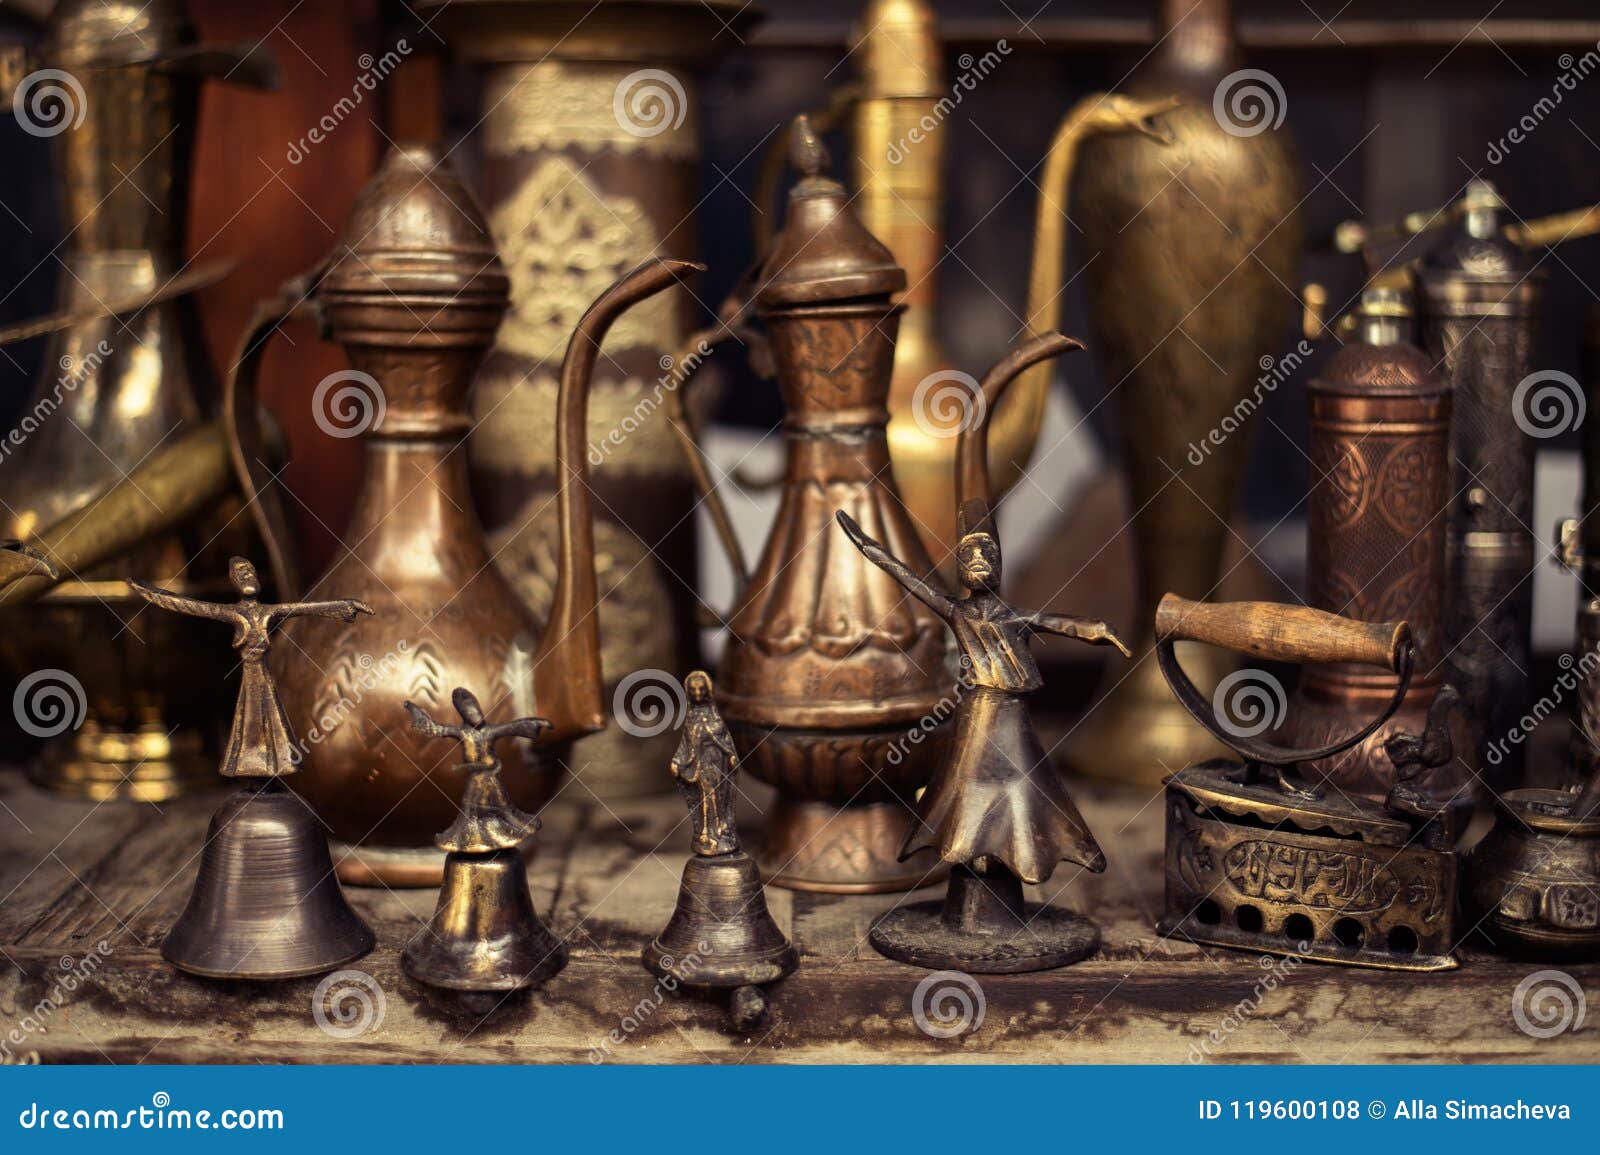 Old Antique Stuff for Sale As Souvenirs at a Market in Albania Editorial  Stock Photo - Image of town, decorative: 119600108